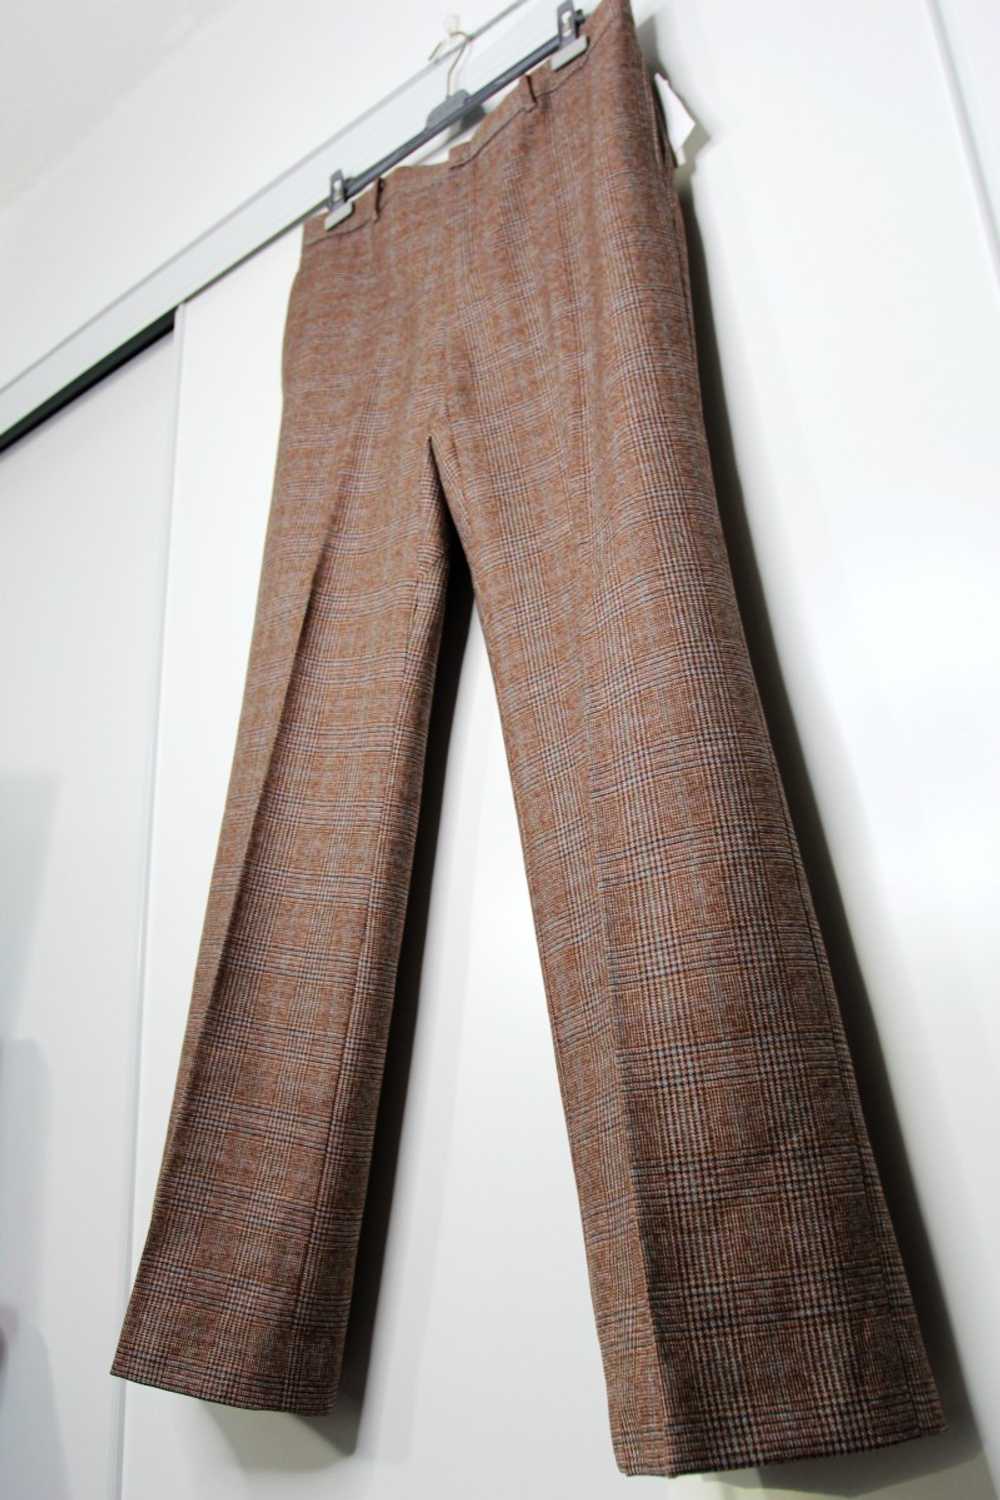 BNWT AW20 WOOYOUNGMI PRINCE OF WALES PANTS 48 - image 9